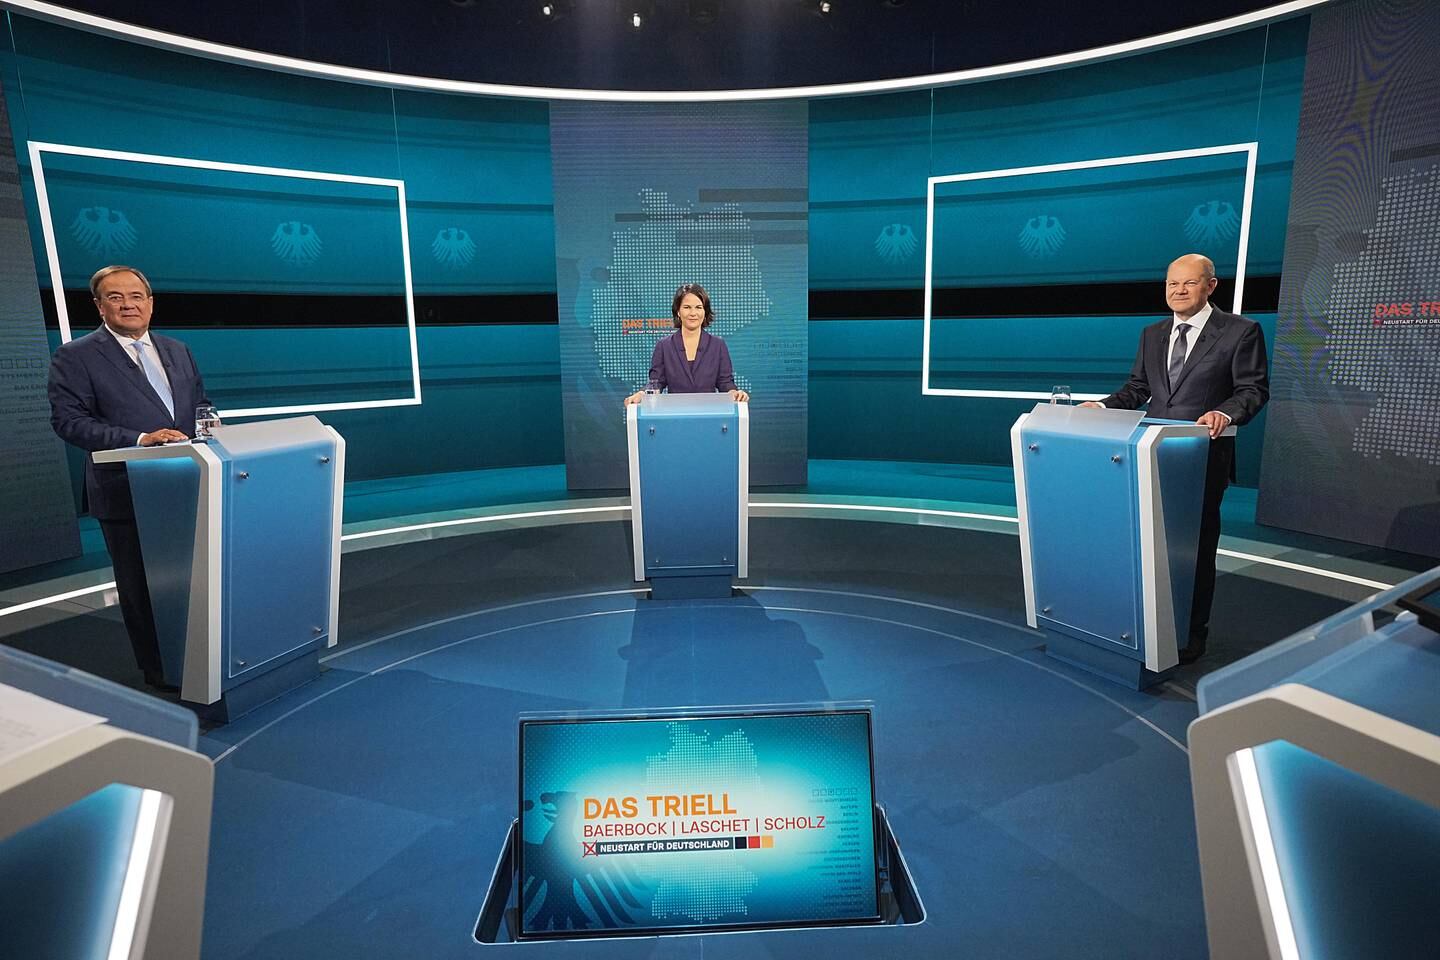 Chancellor candidates Armin Laschet, Annalena Baerbock and Olaf Scholz during a televised debate on Sunday. EPA 